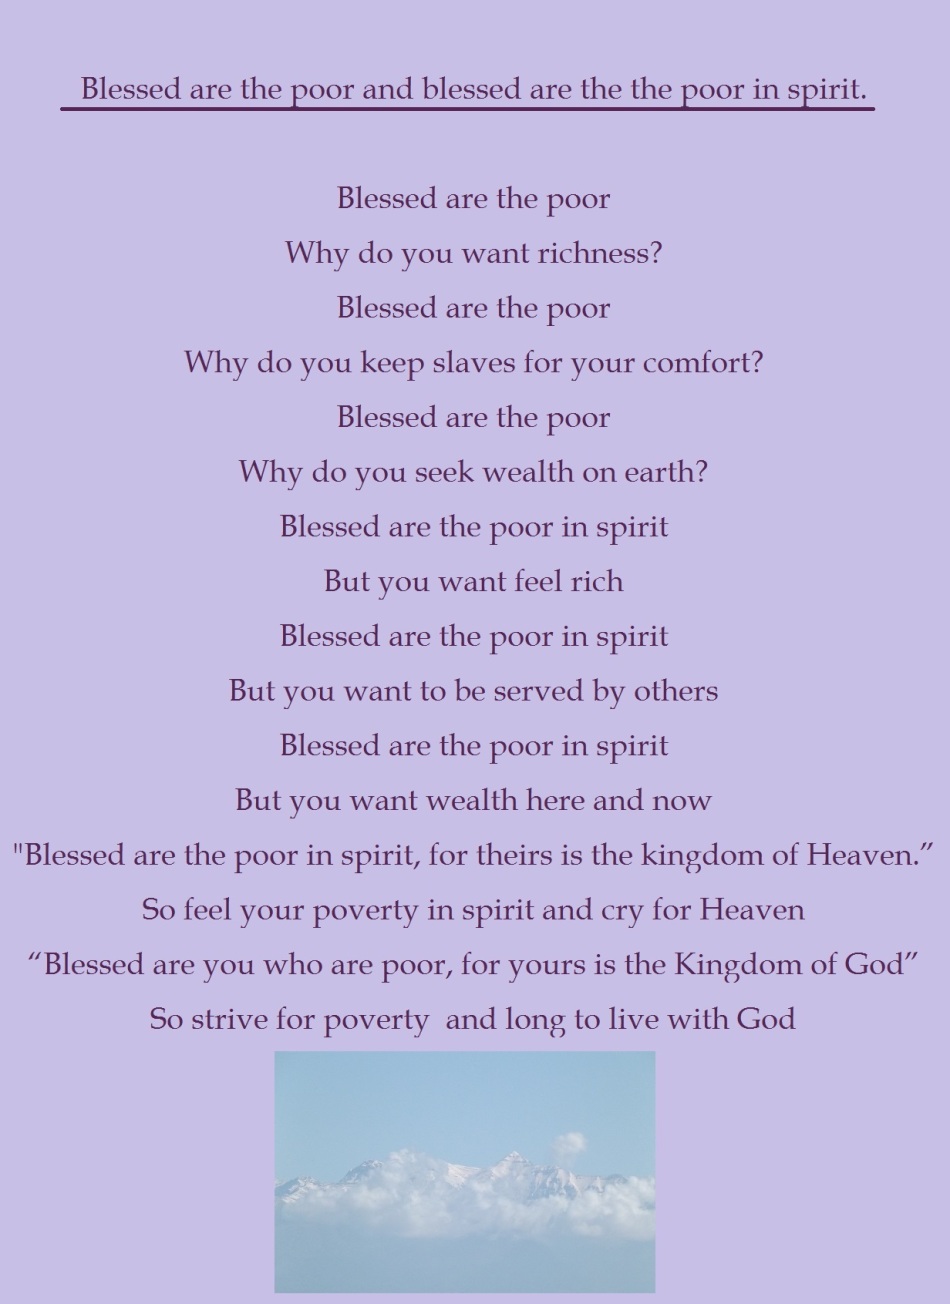 Blessed are the poor